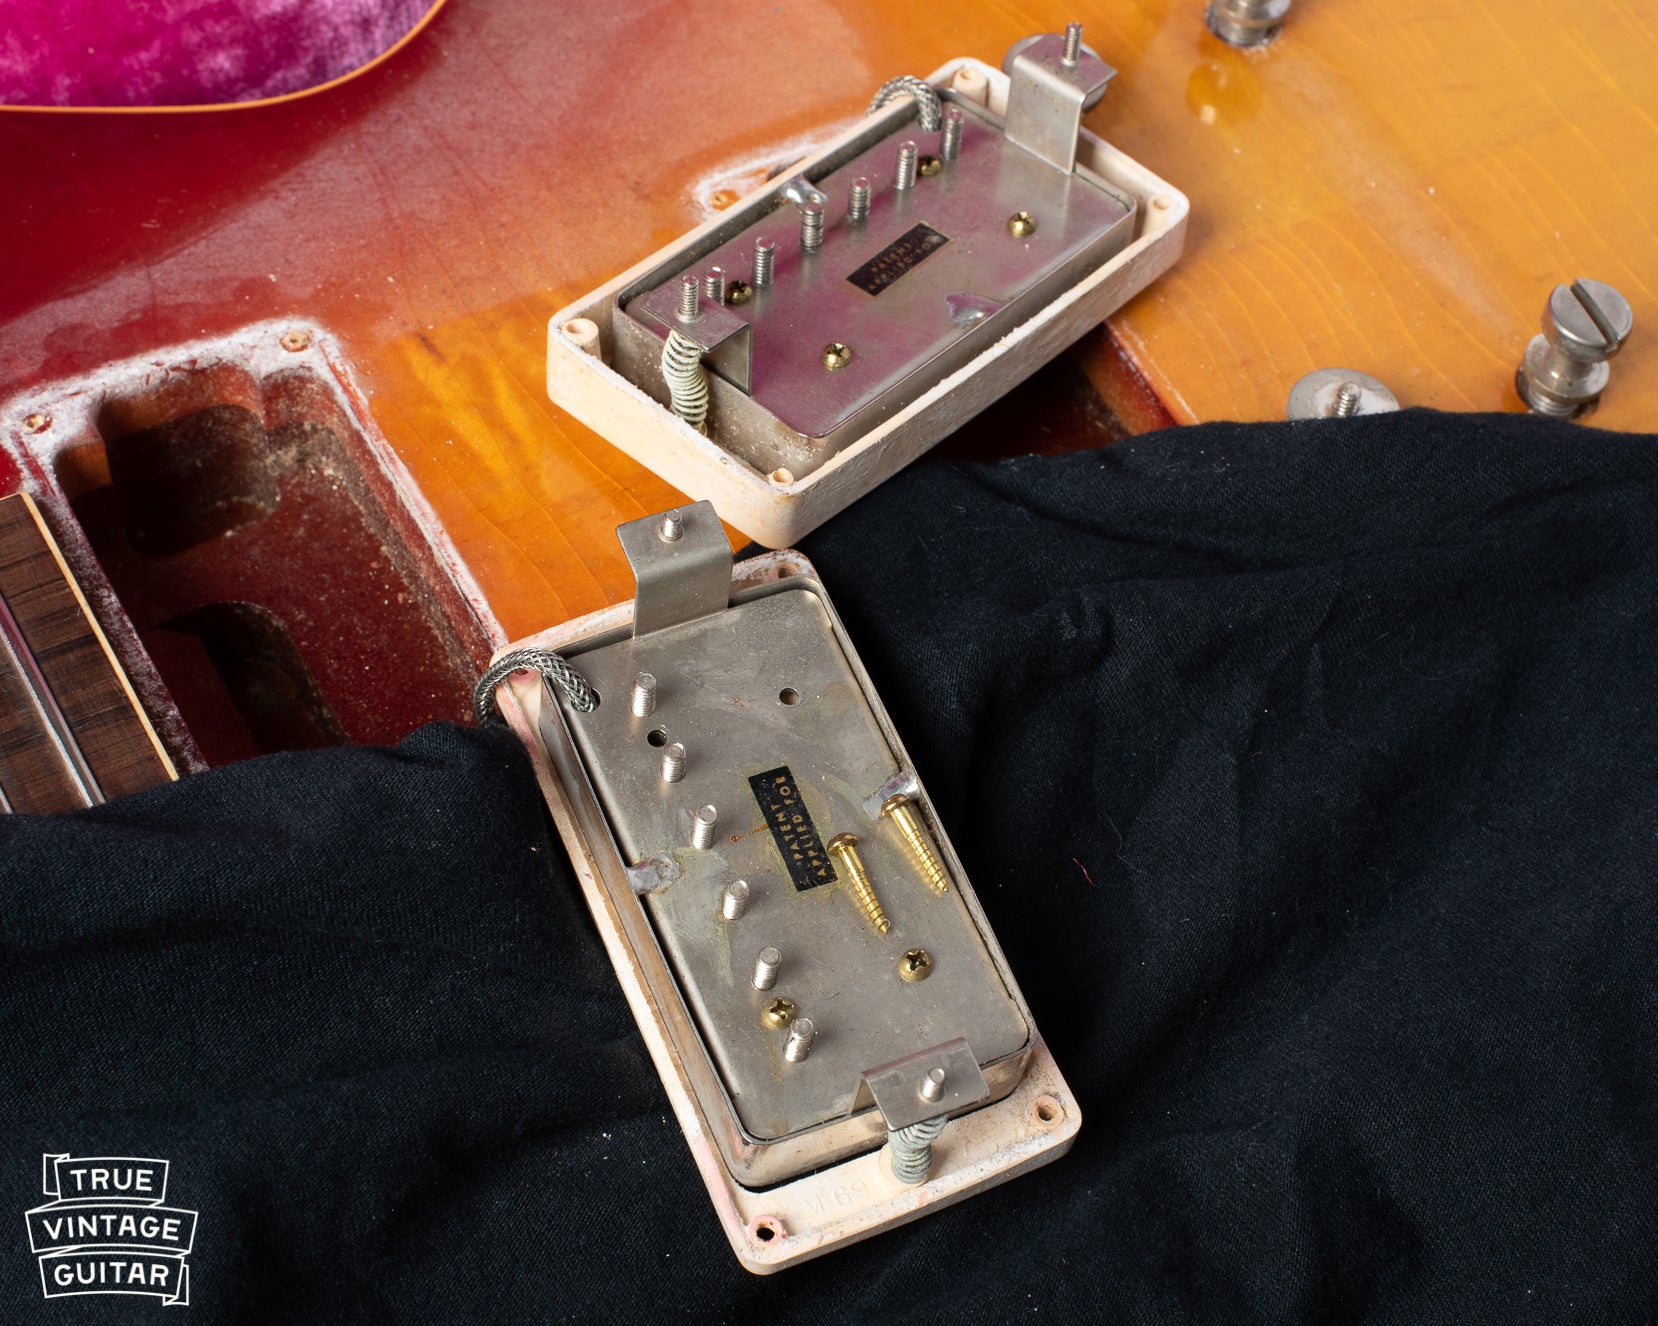 Double white bobbin PAF Patent Applied For humbucking pickup in Gibson Les Paul Standard 1960.